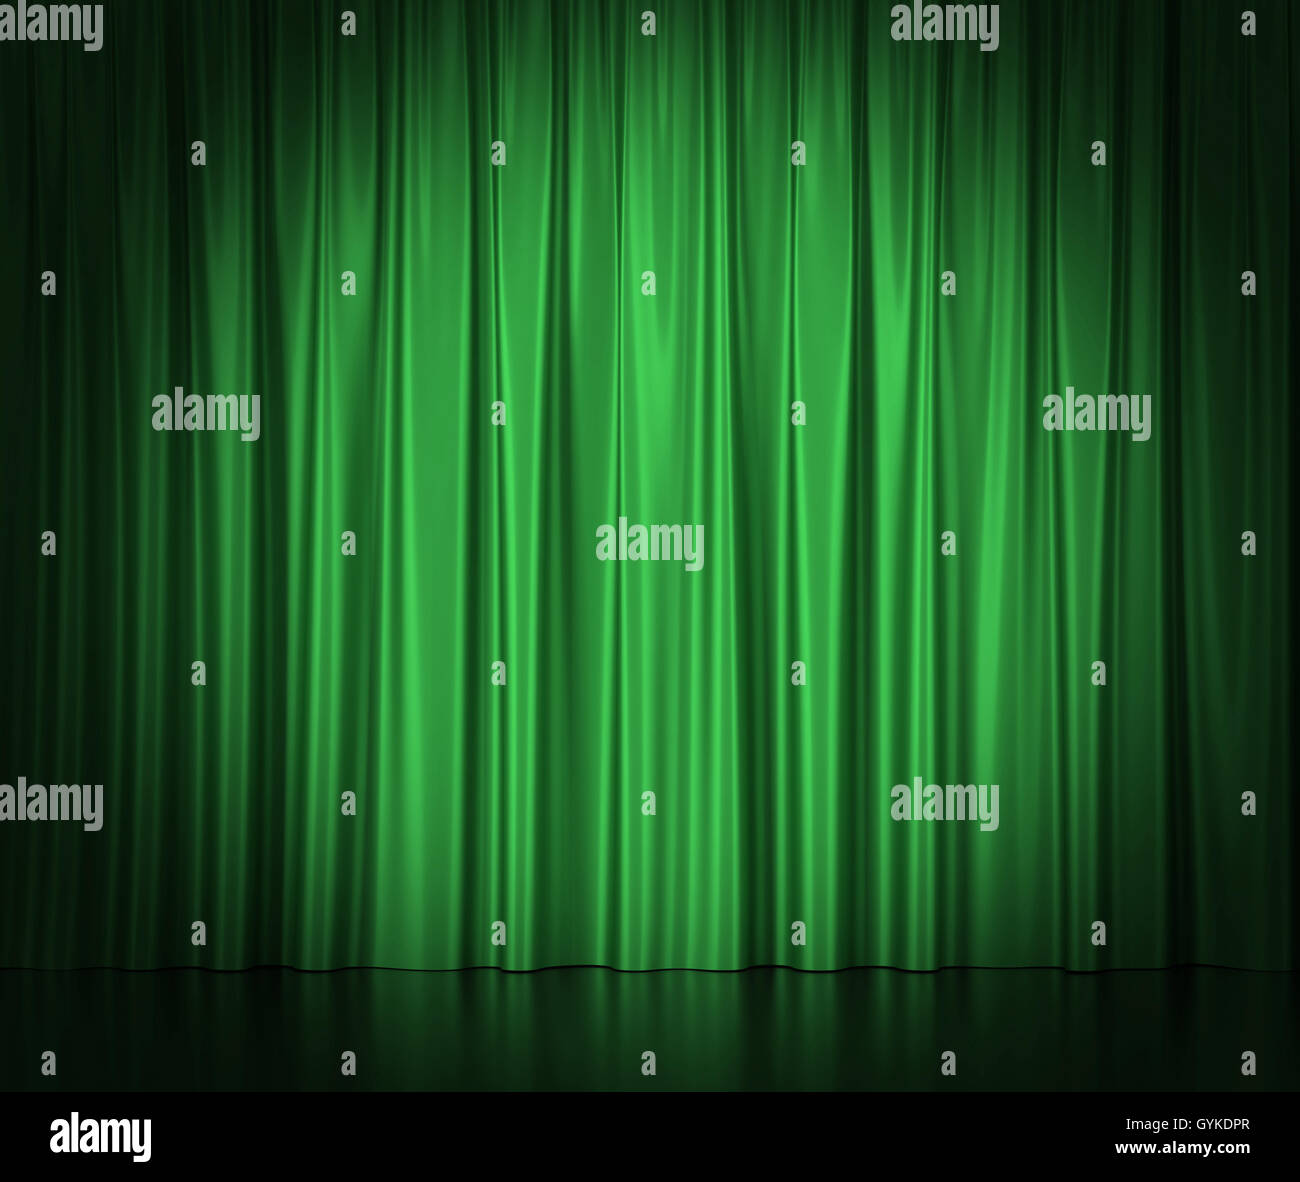 Green silk curtains for theater and cinema spotlit light in the center. 3d illustration Stock Photo